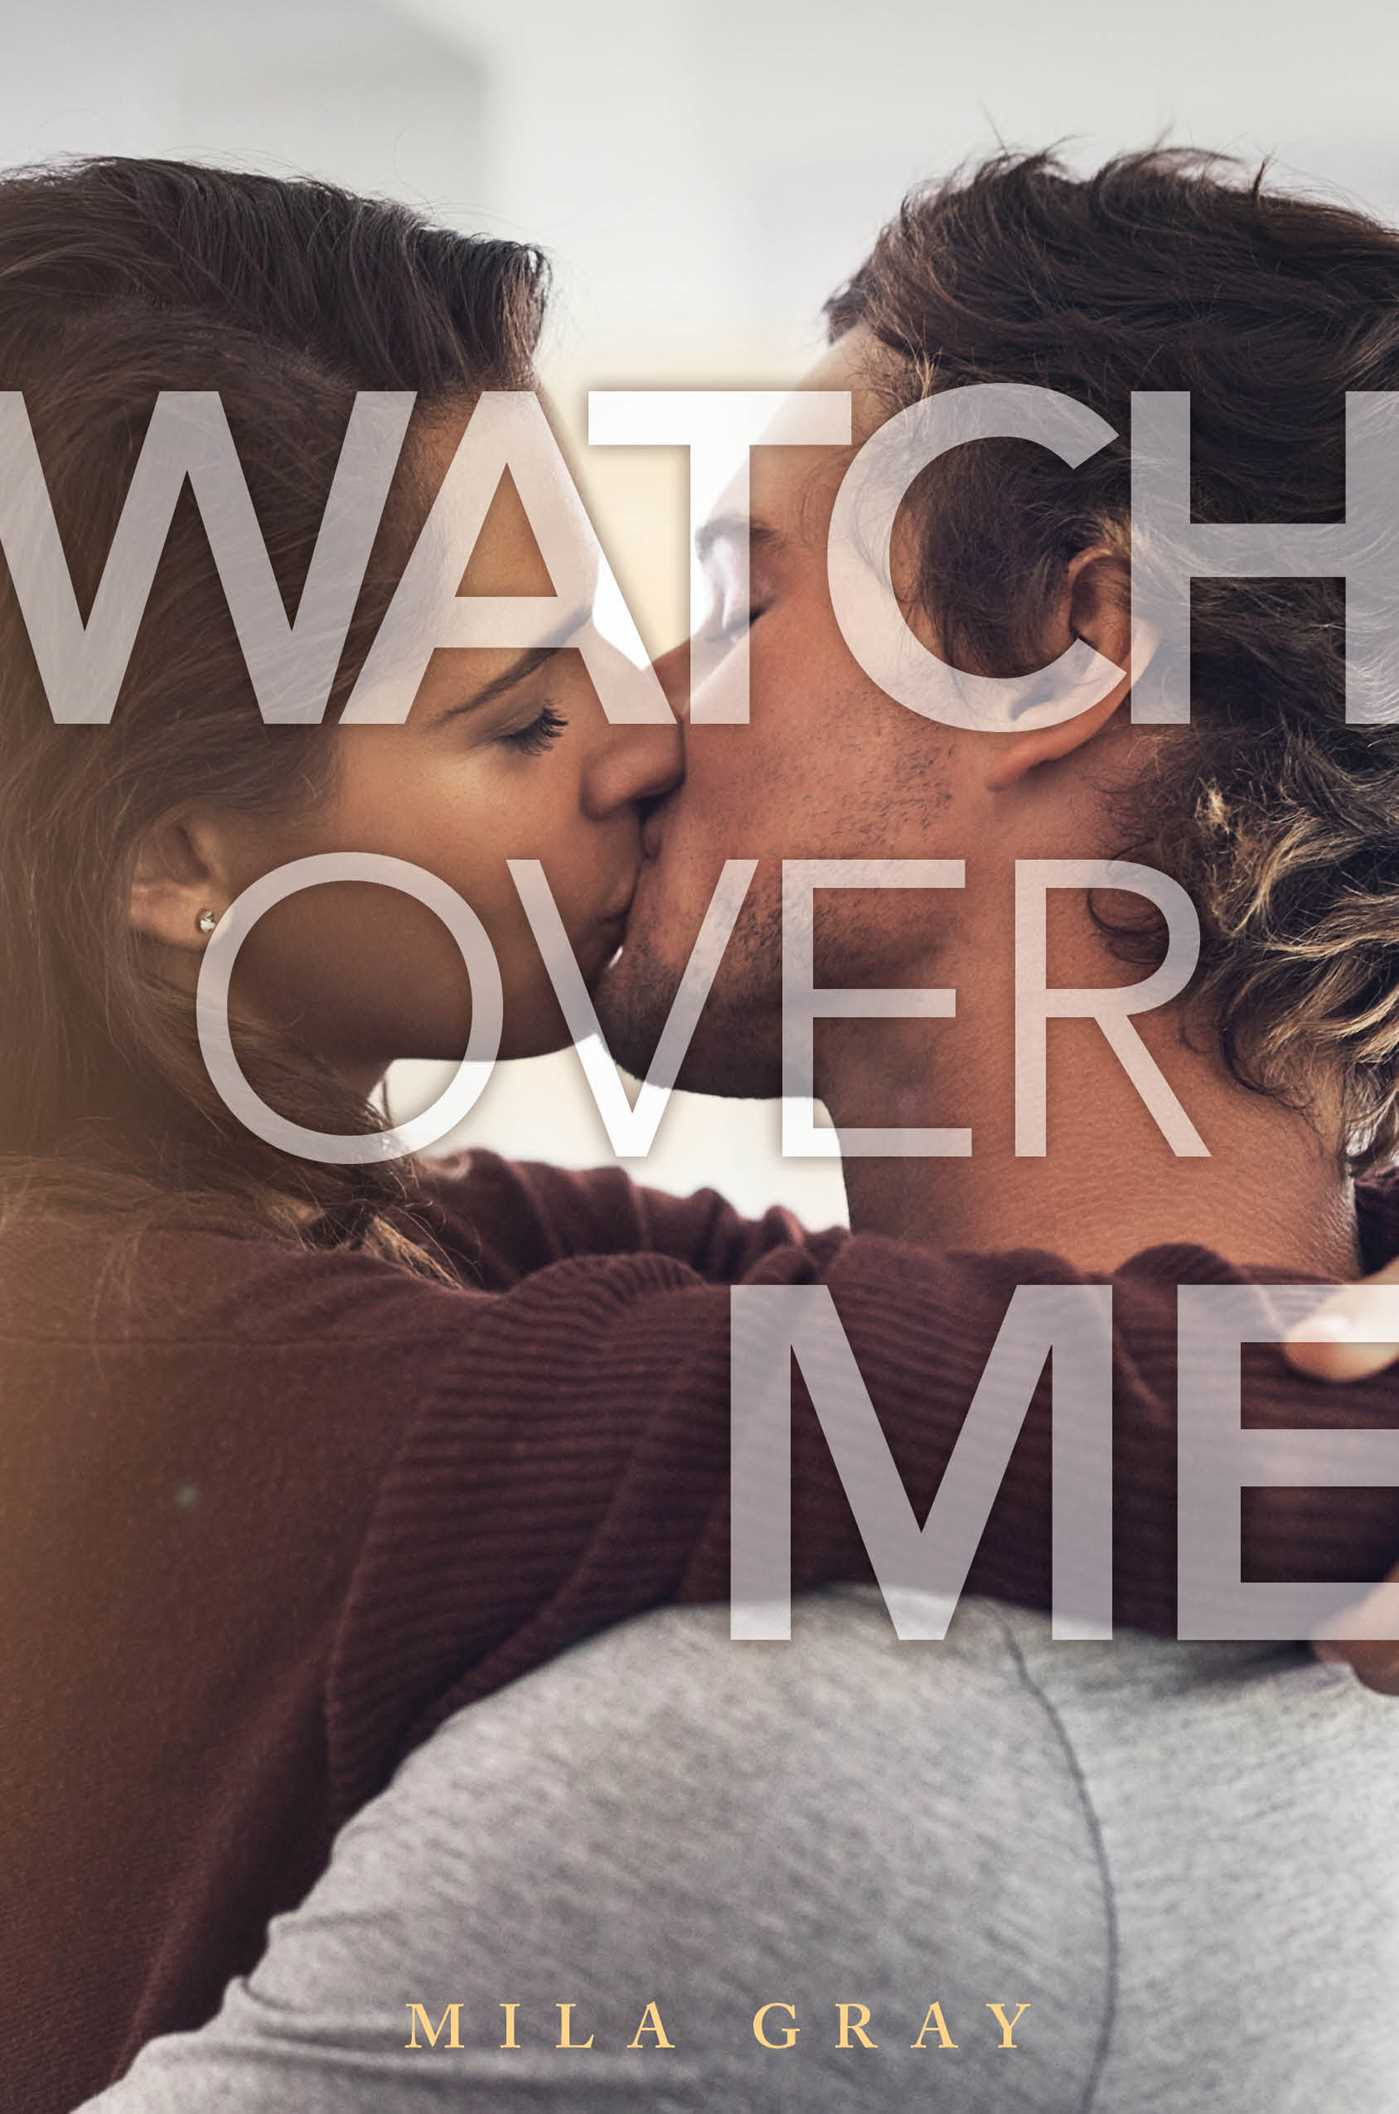 Watch Over Me PDF